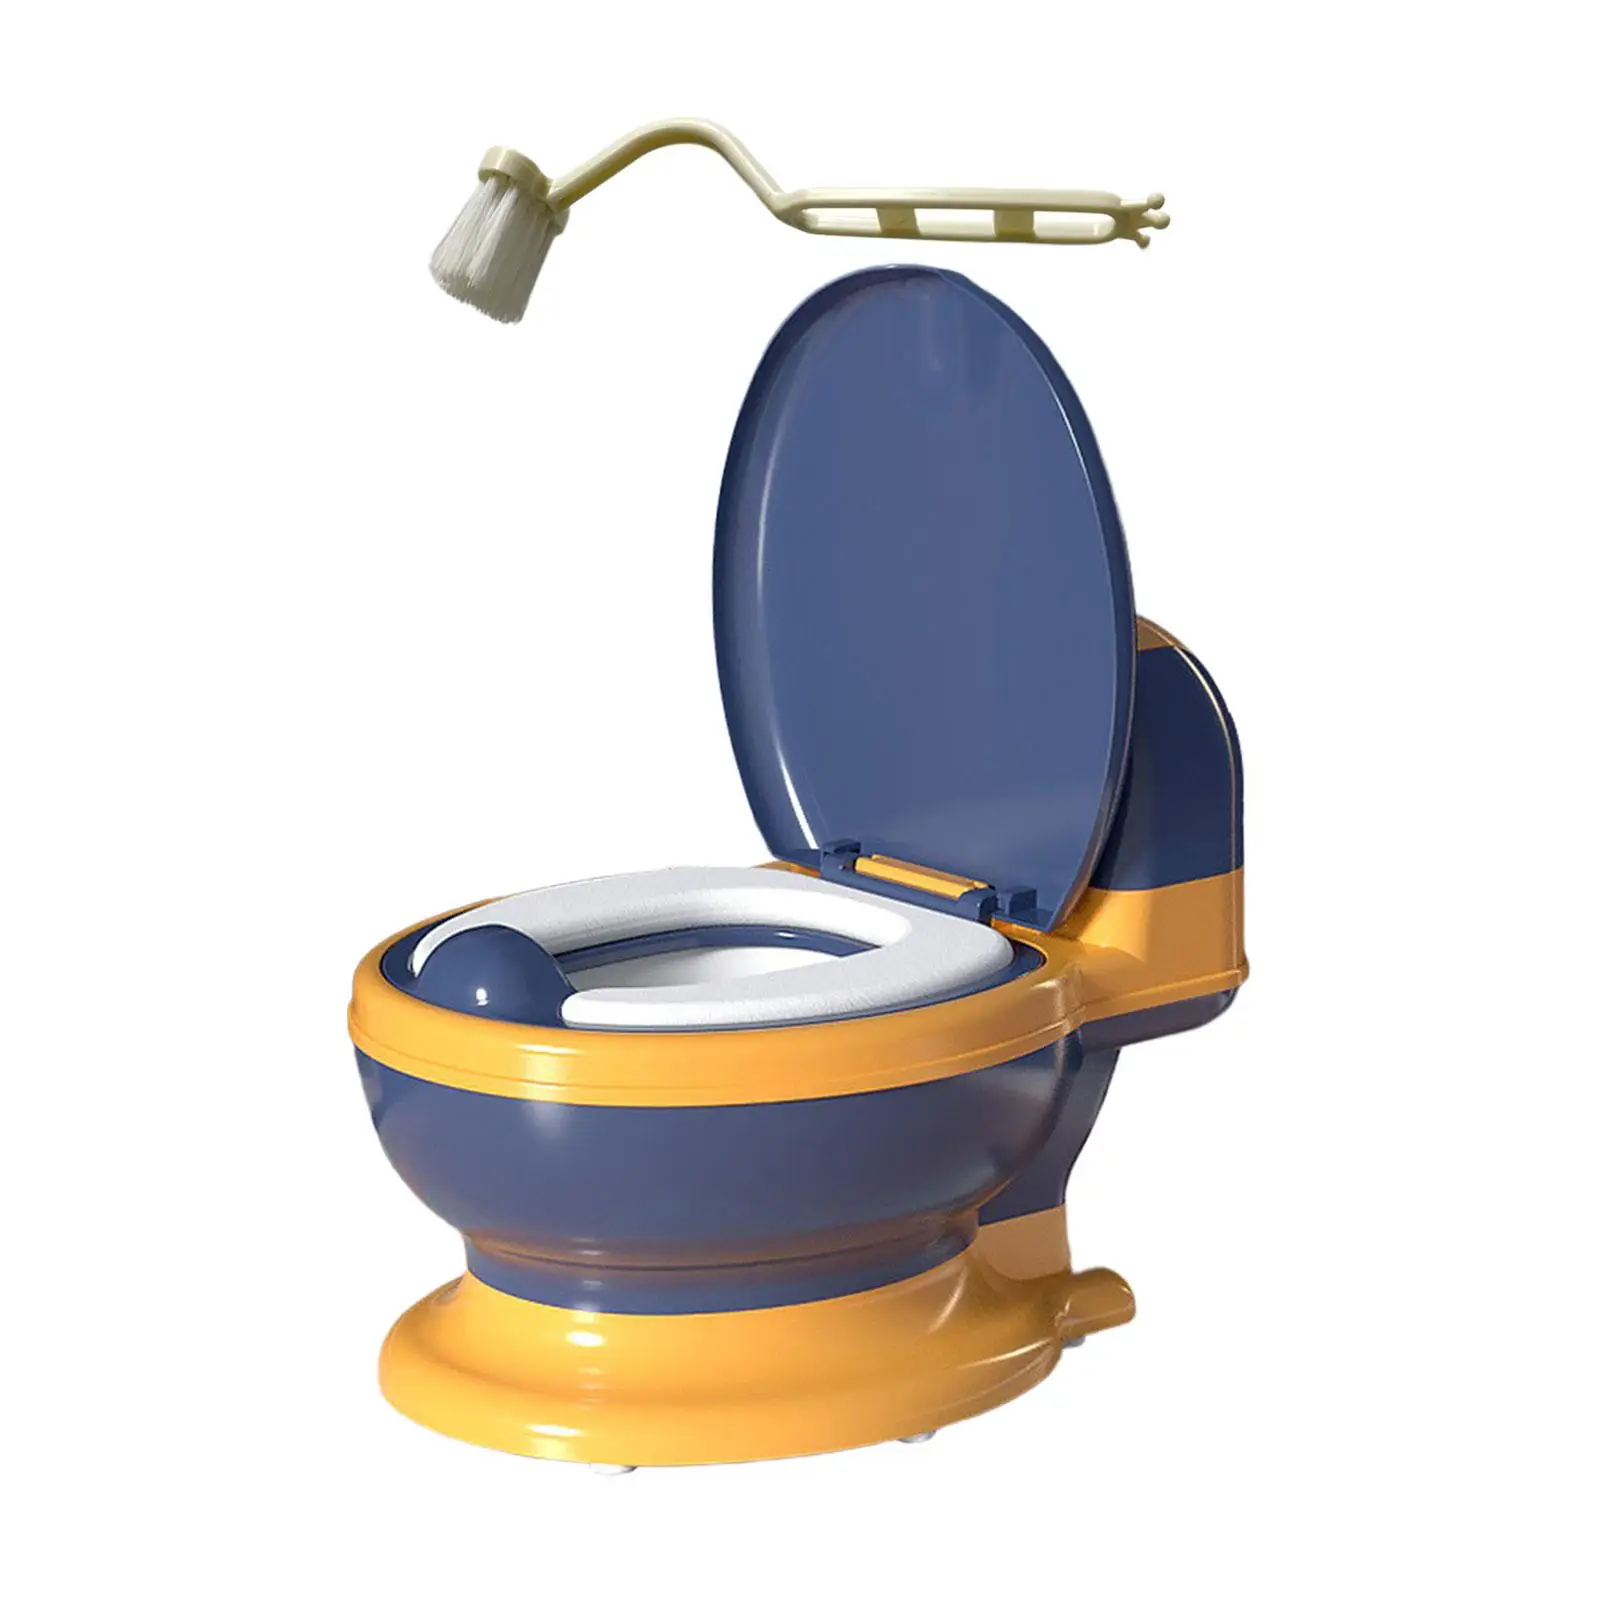 Toilet Training Potty with Spilling Guard Compact Size Potty Seat Infants